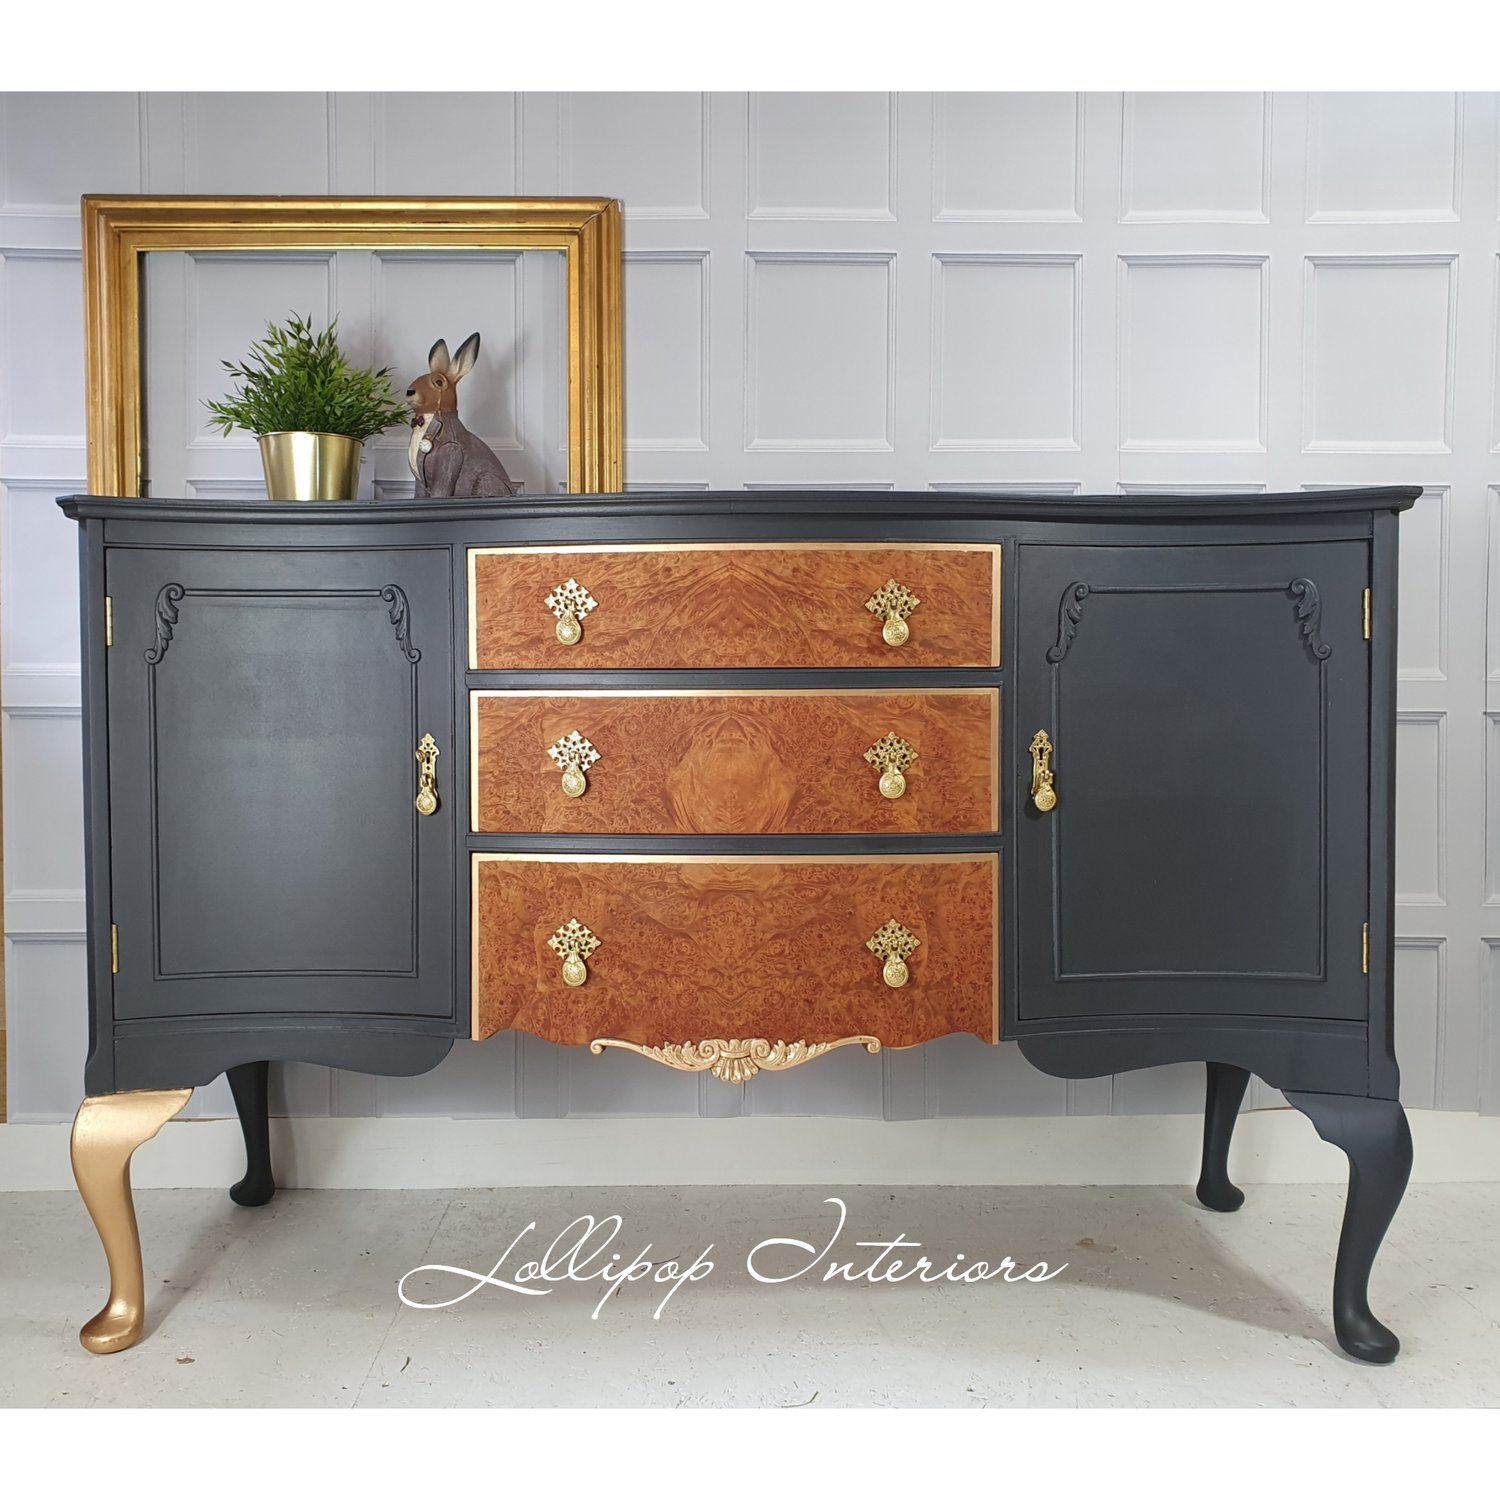 Image of Beautiful vintage sideboard in grey and gold